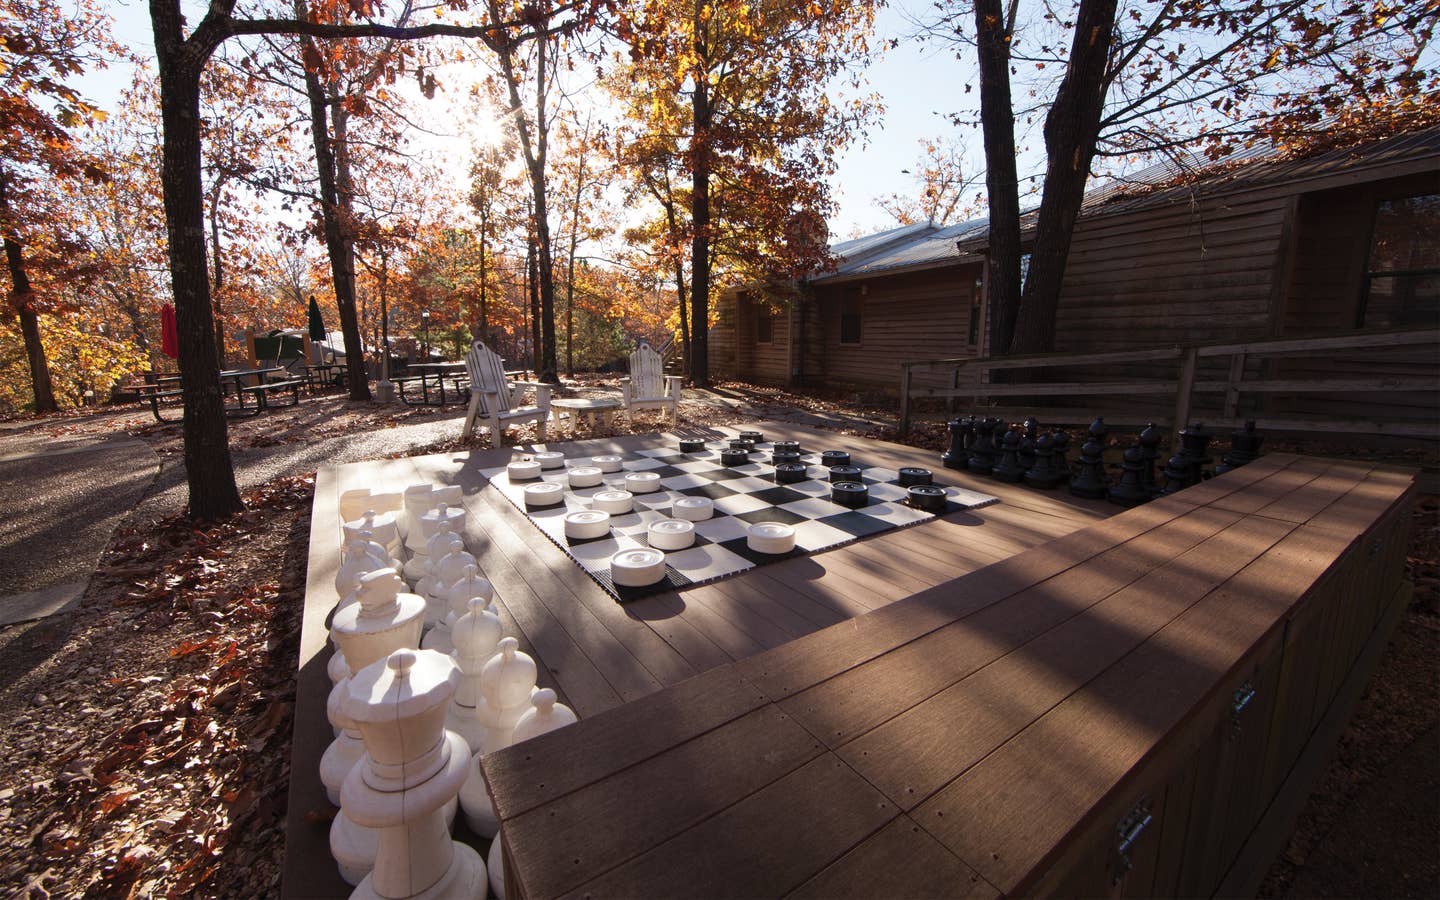 Outdoor giant checkers at Ozark Mountain Resort in Kimberling City, Missouri.